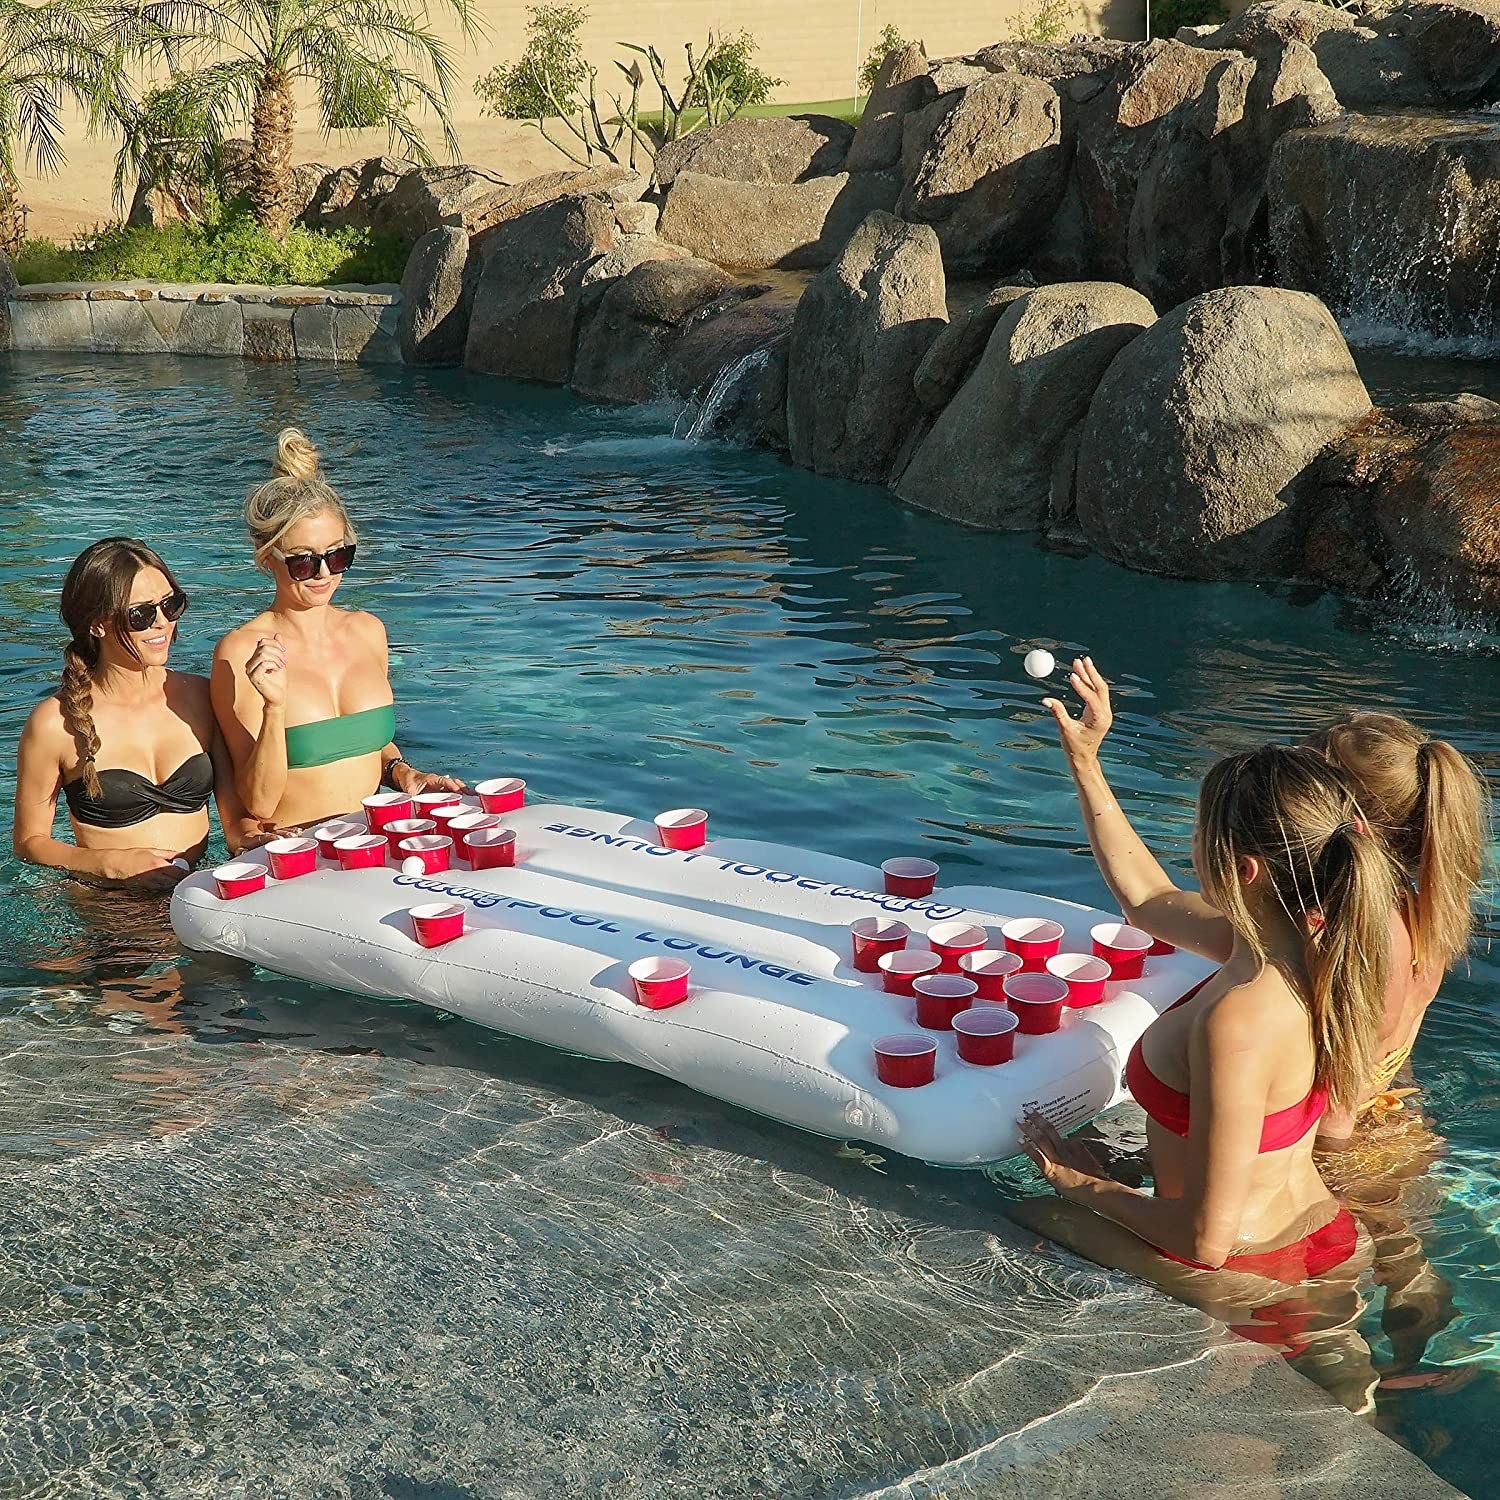 Four models play beer pong on the floating rectangular rafter with cup holders for solo cups